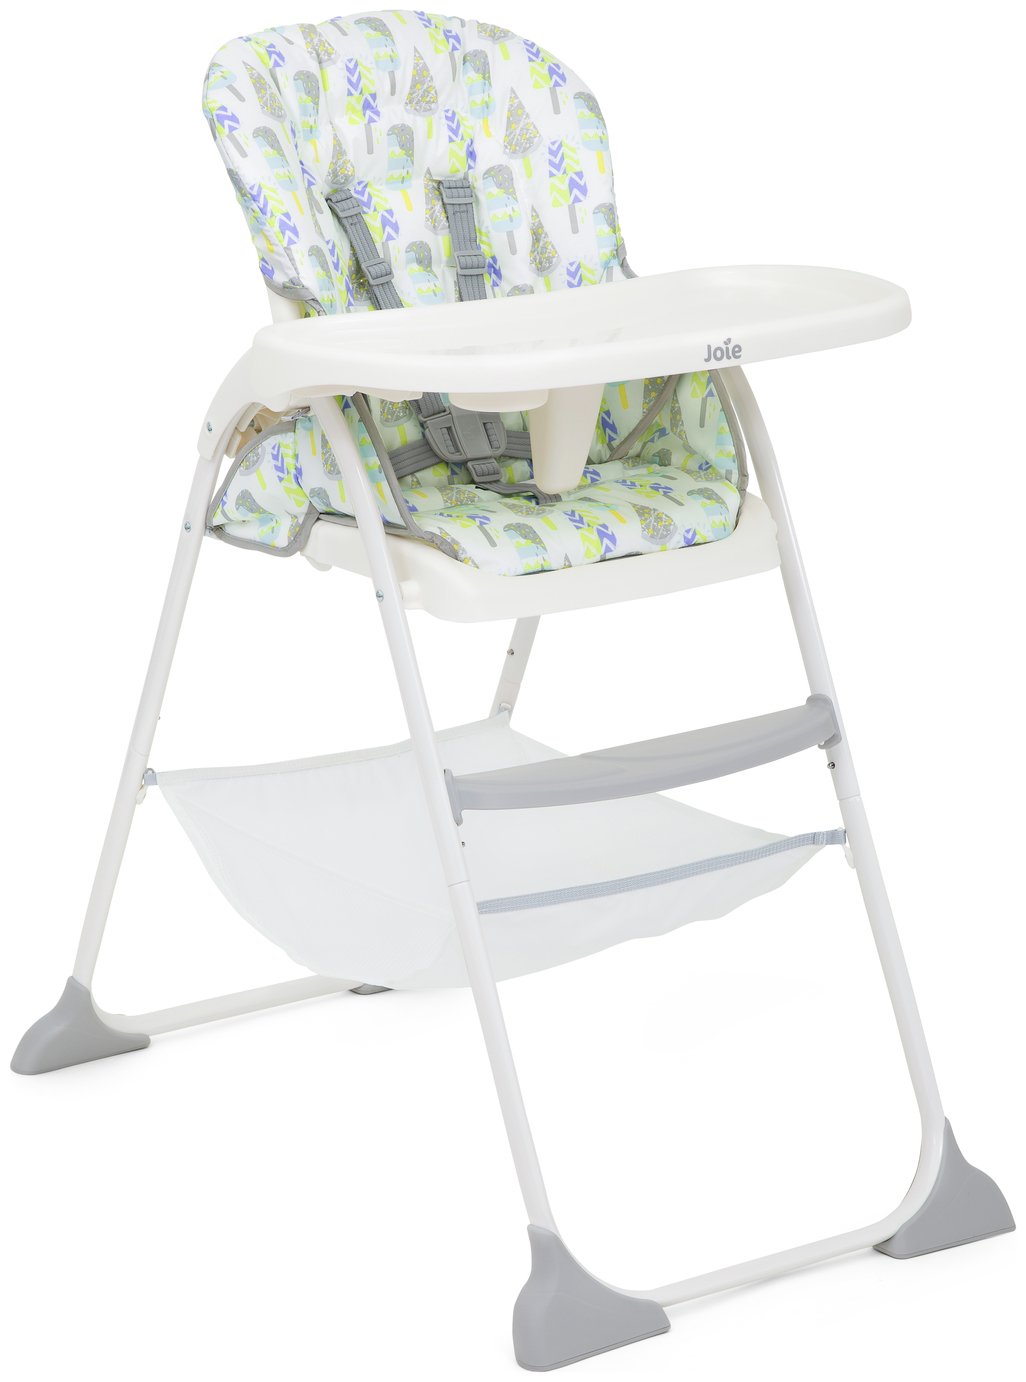 Joie Mimzy Eco Highchair - Popsicle